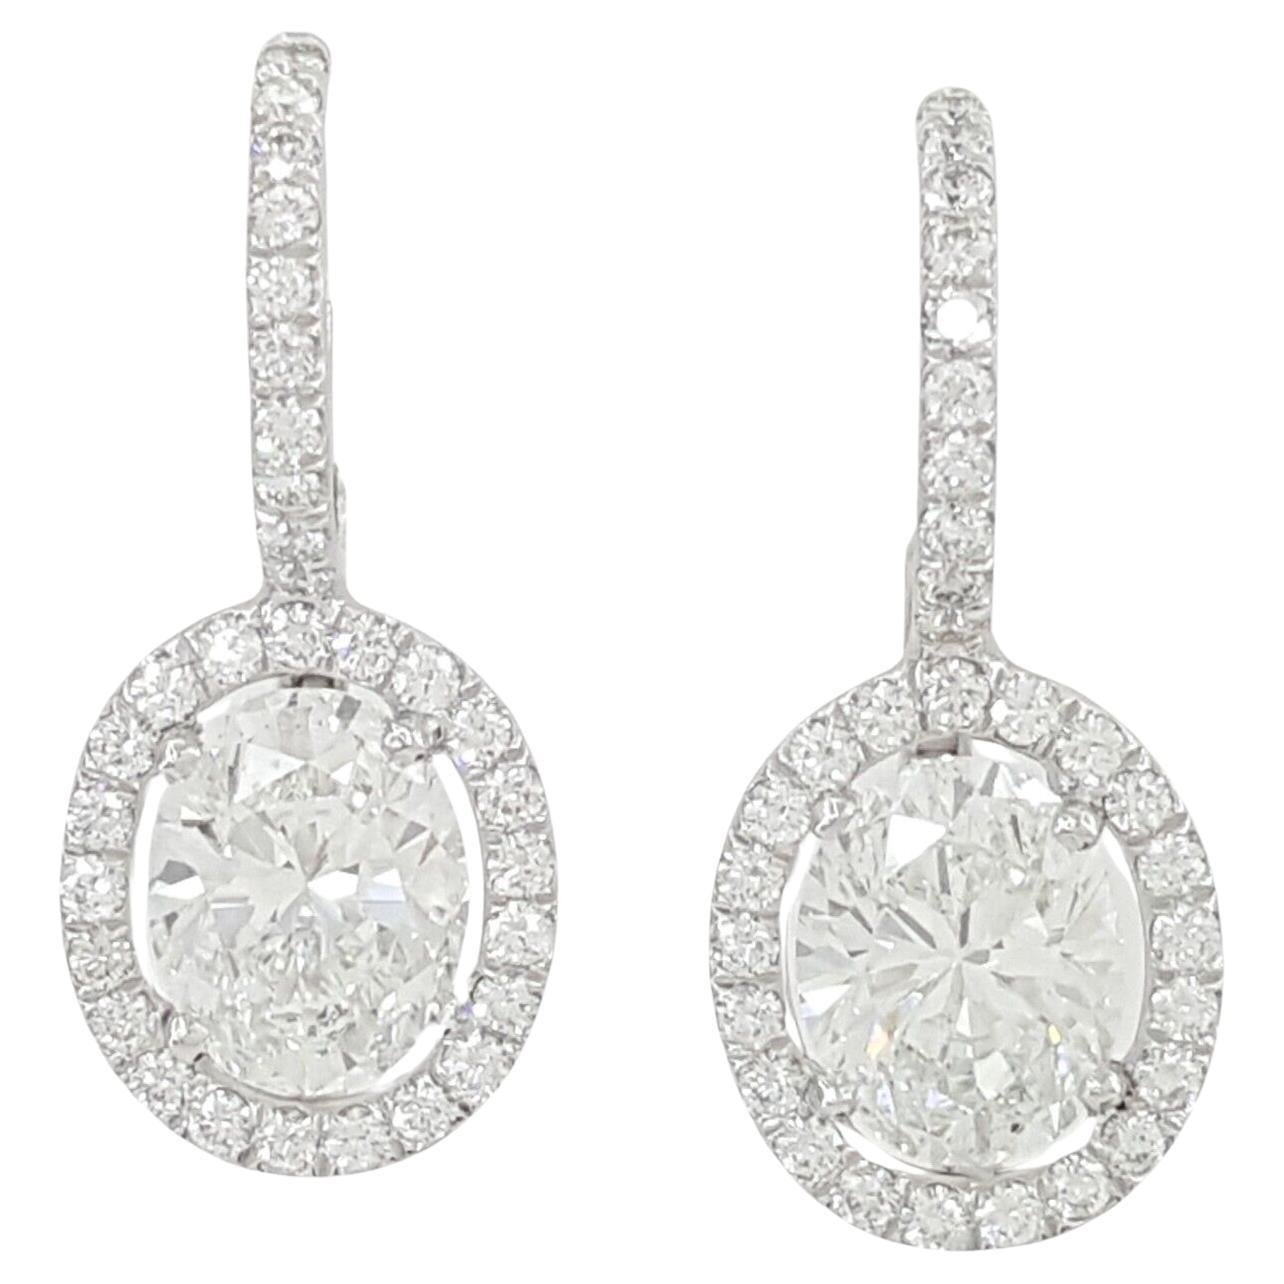 These earrings feature a total weight of 2.66 carats of natural oval brilliant-cut diamonds set in a halo dangle/drop style. The earrings weigh 3.6 grams and comprise two natural oval brilliant-cut diamonds in the center, totaling 2.19 carats with